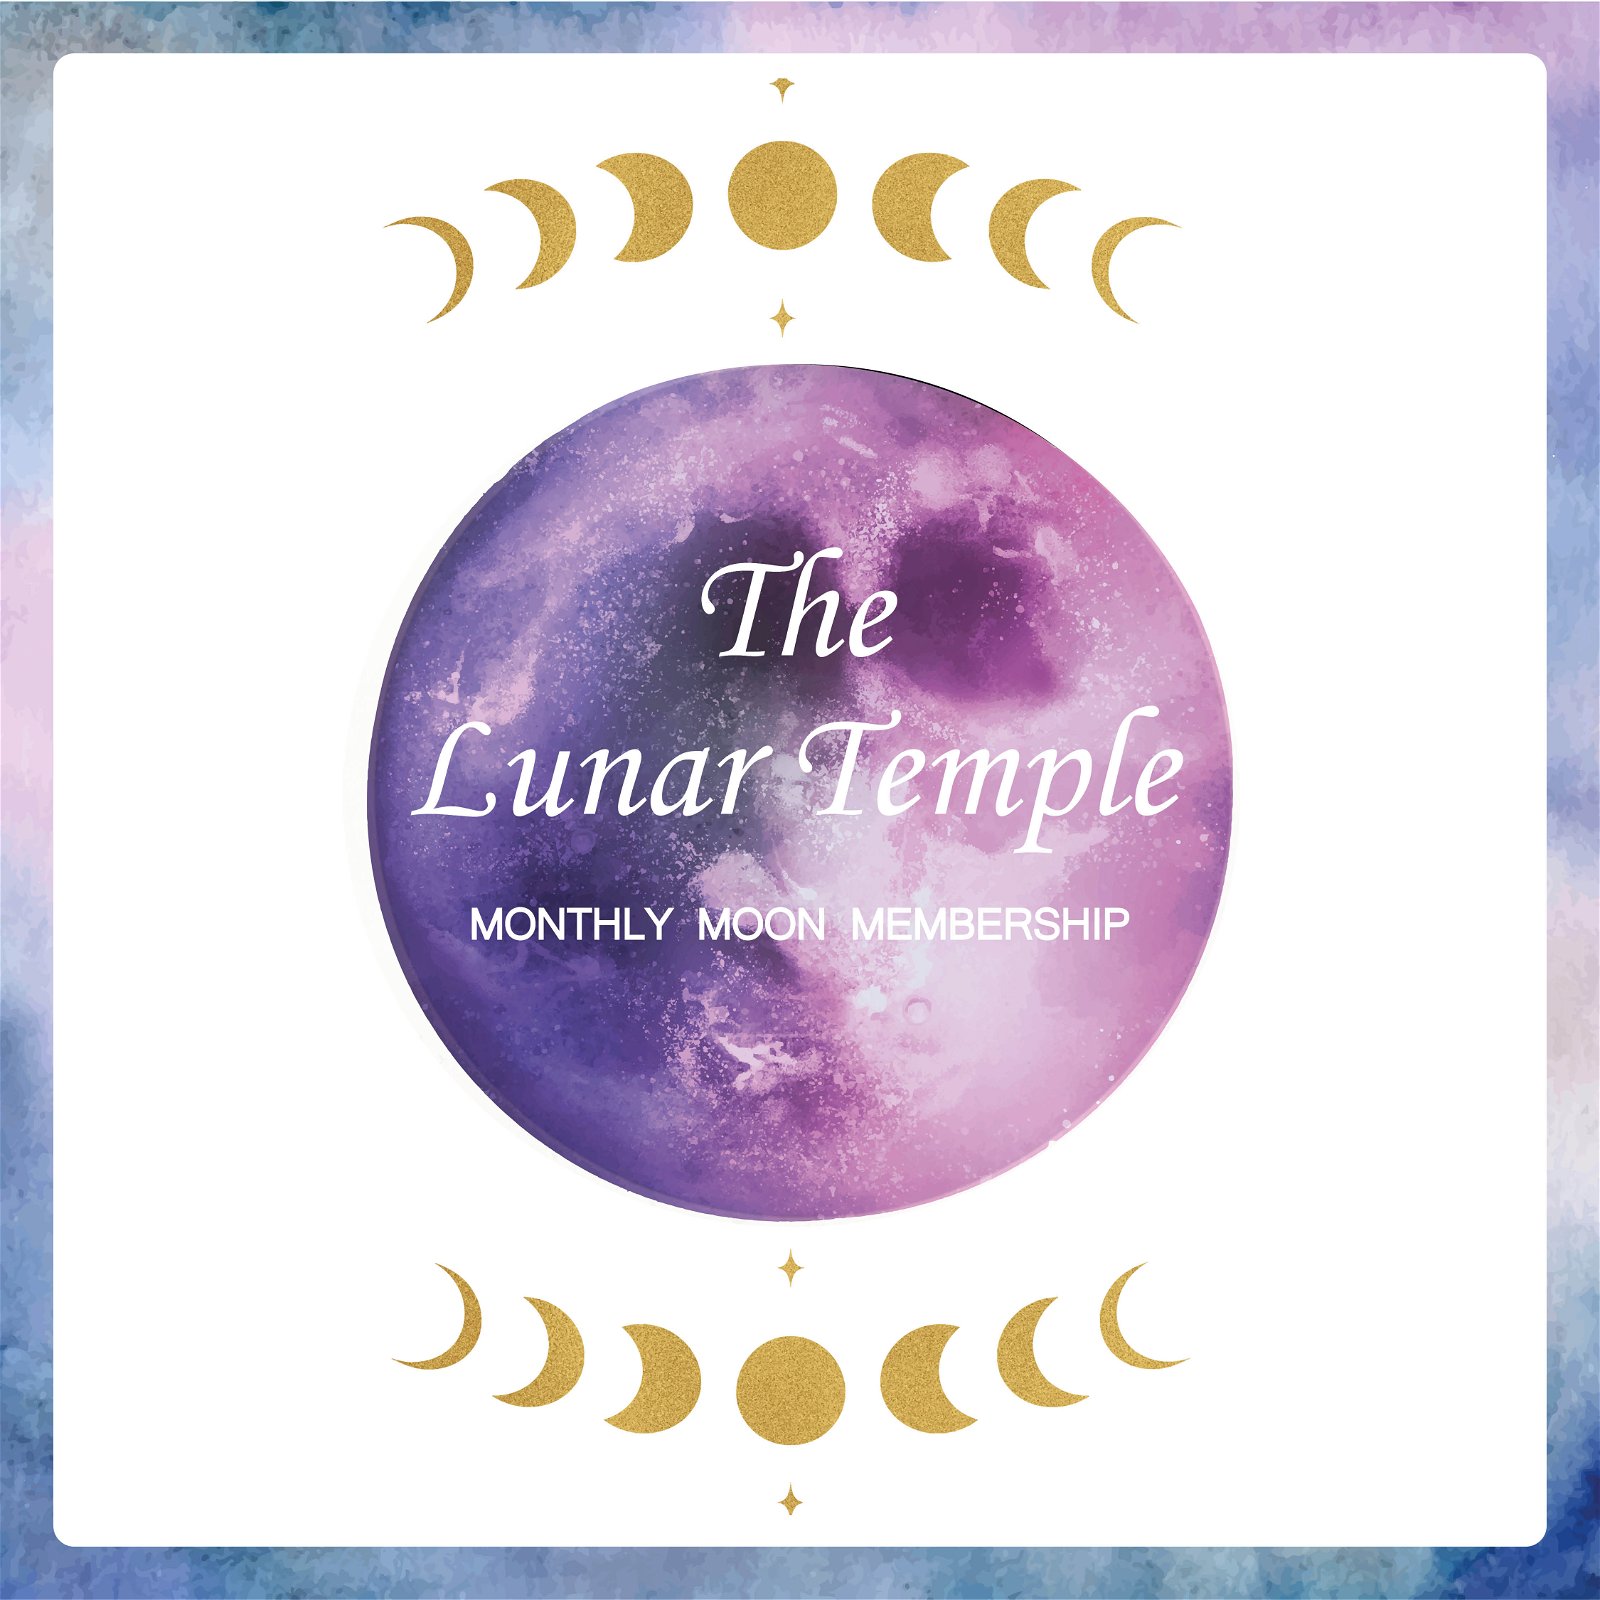 The Lunar Temple - Monthly Moon Membership